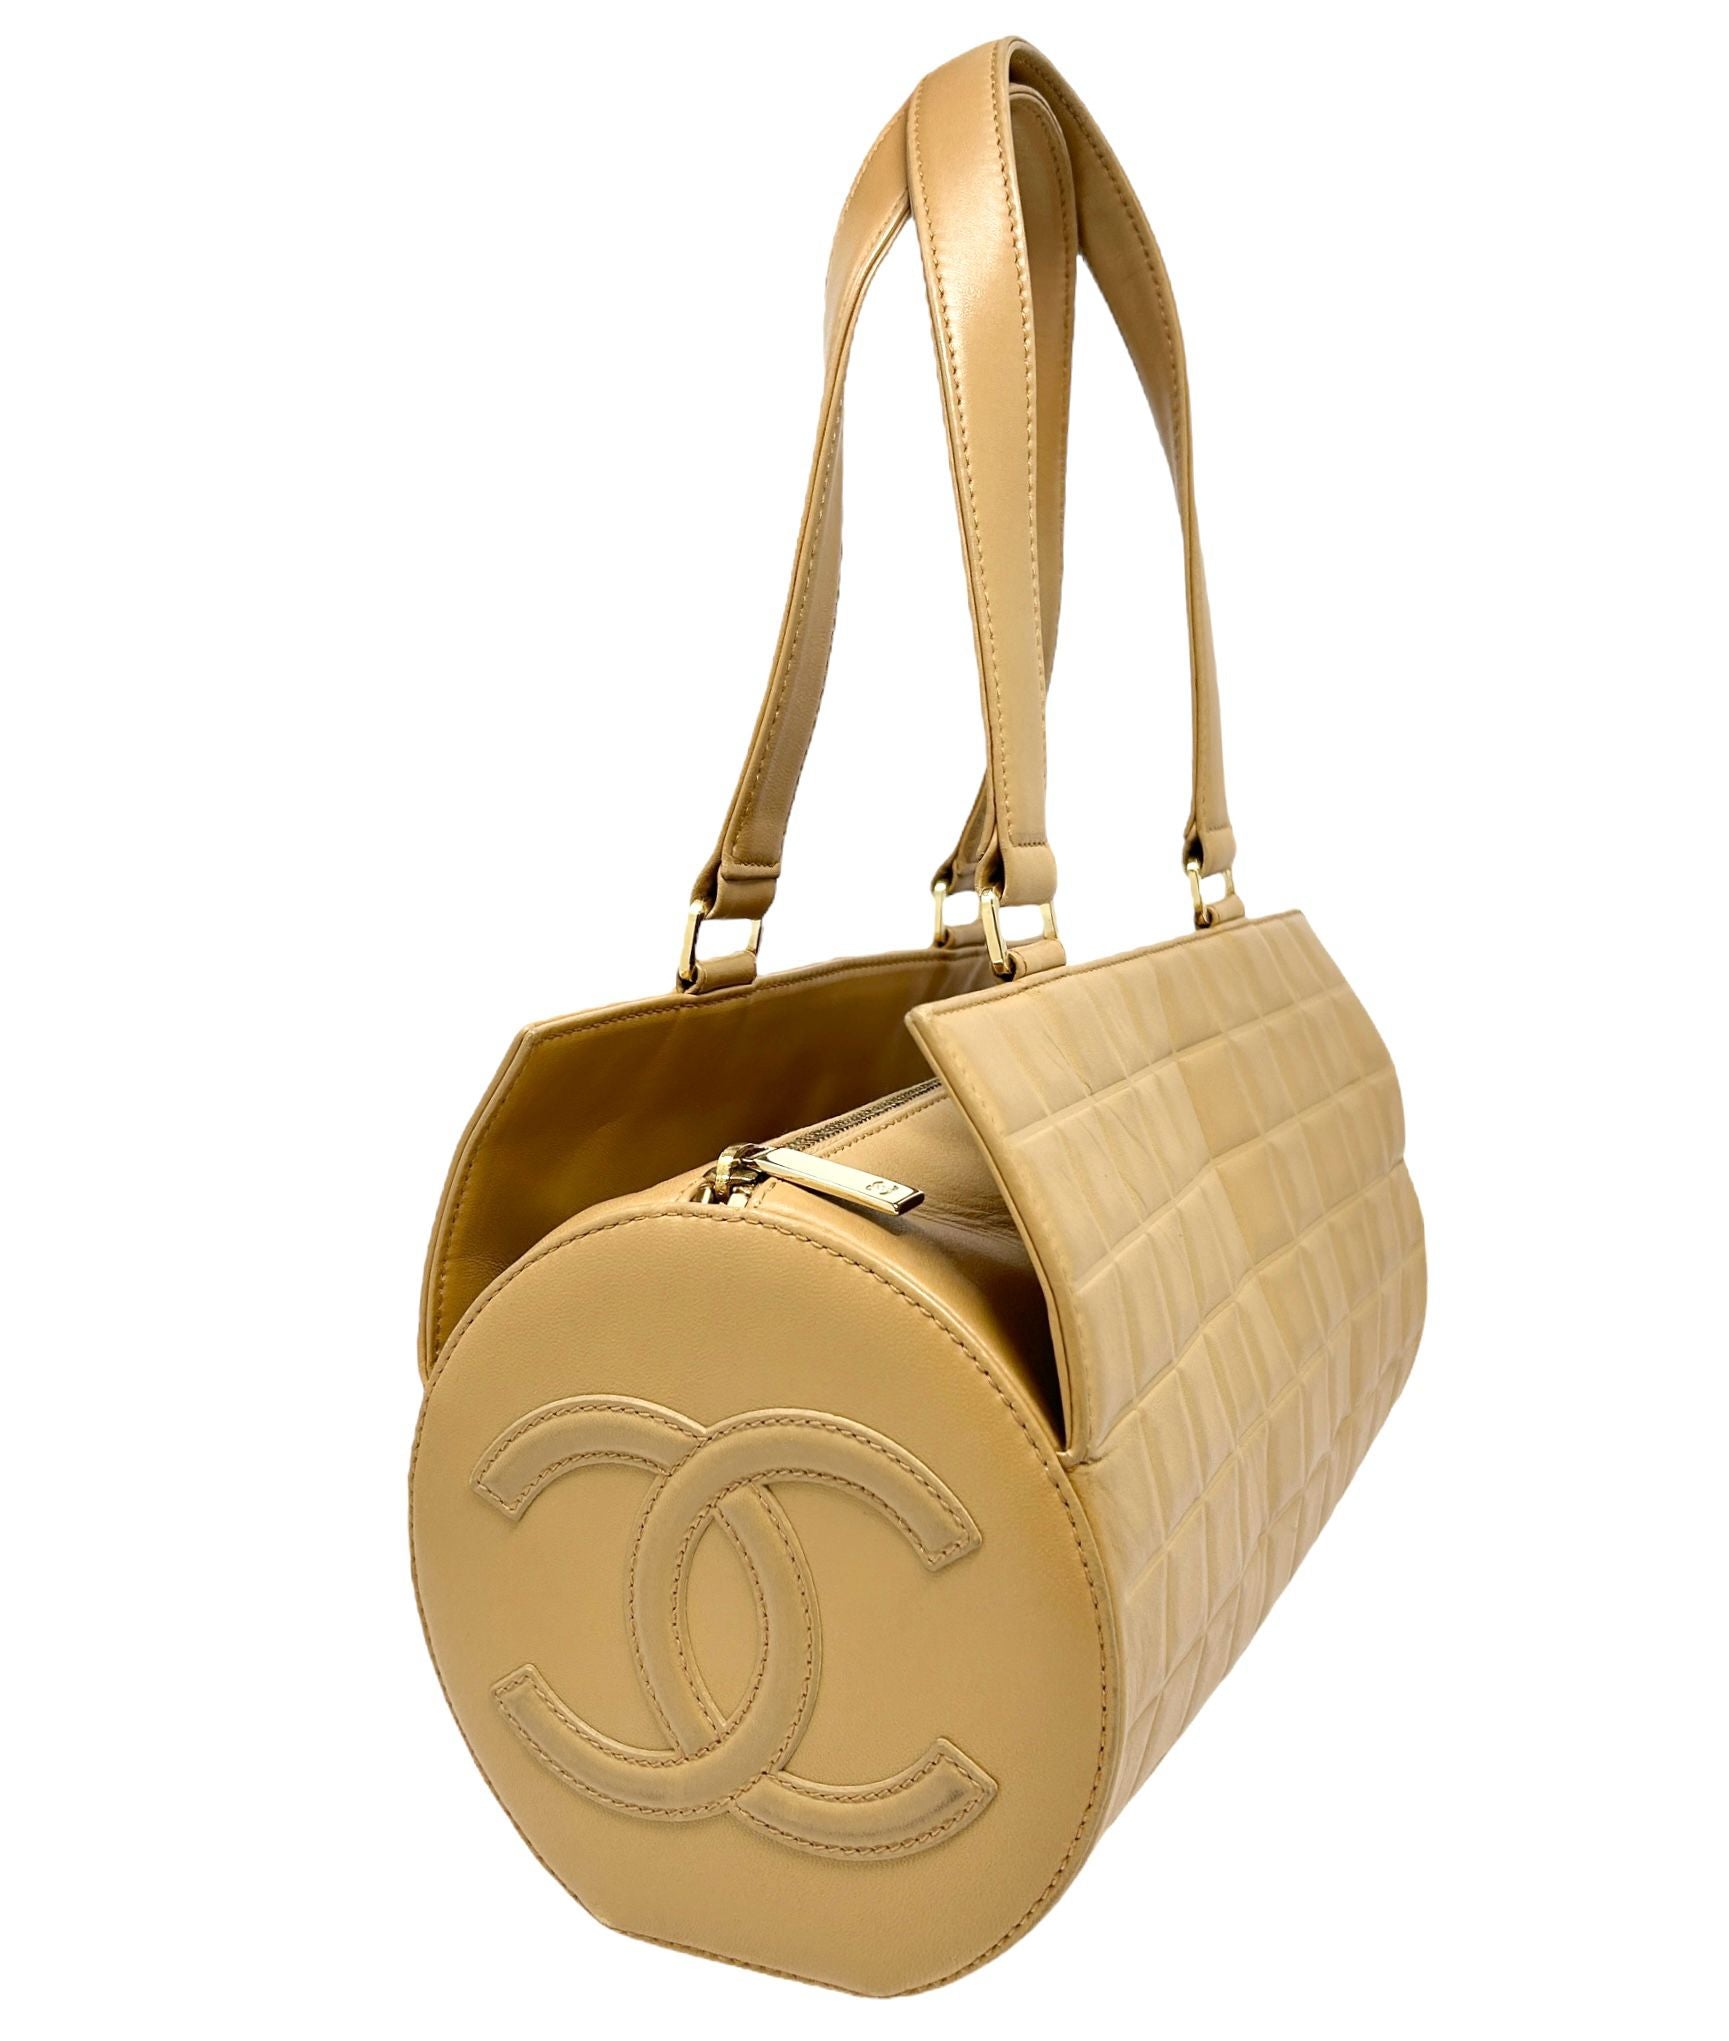 Chanel Tan Quilted Cylinder Bag